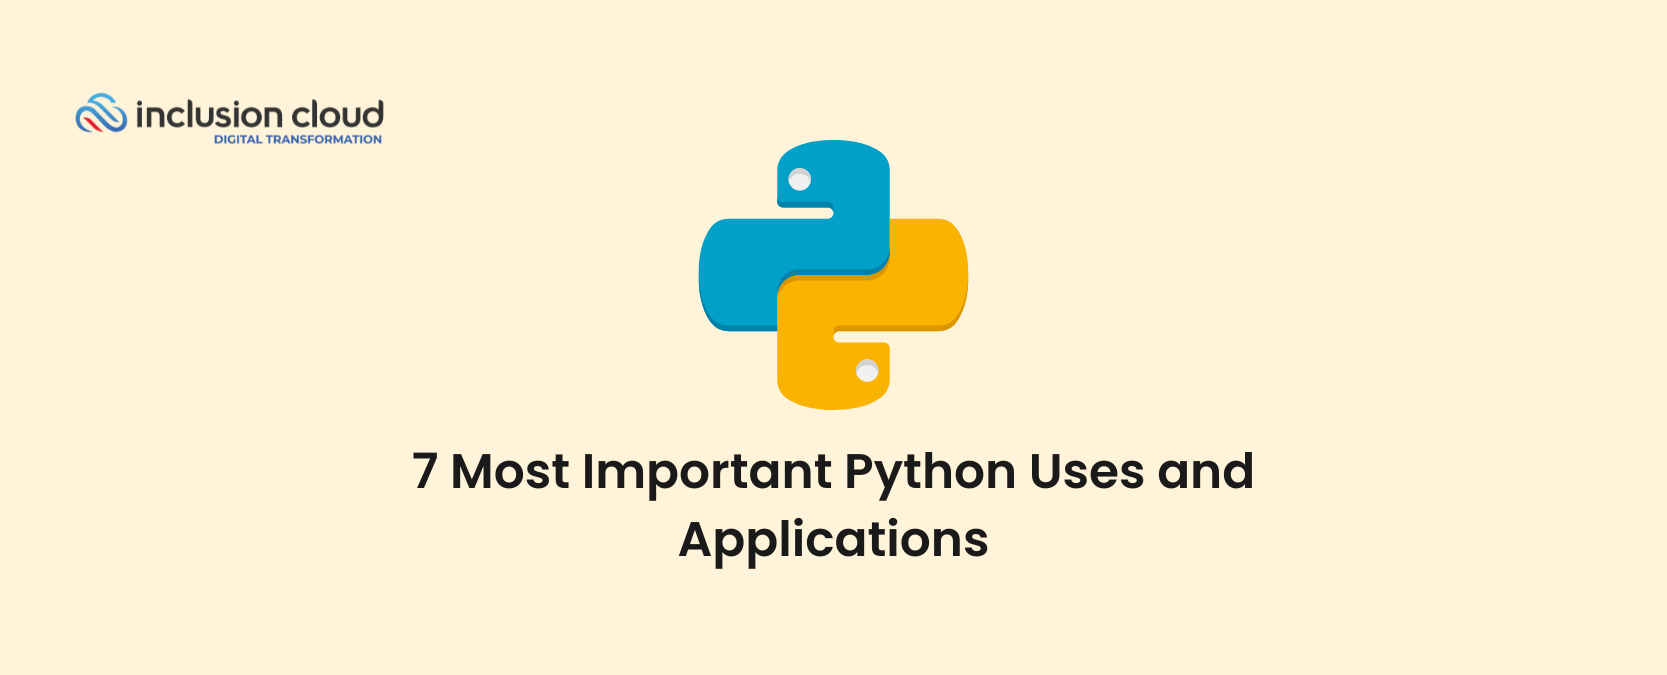 7 Most Important Python Uses and Applications